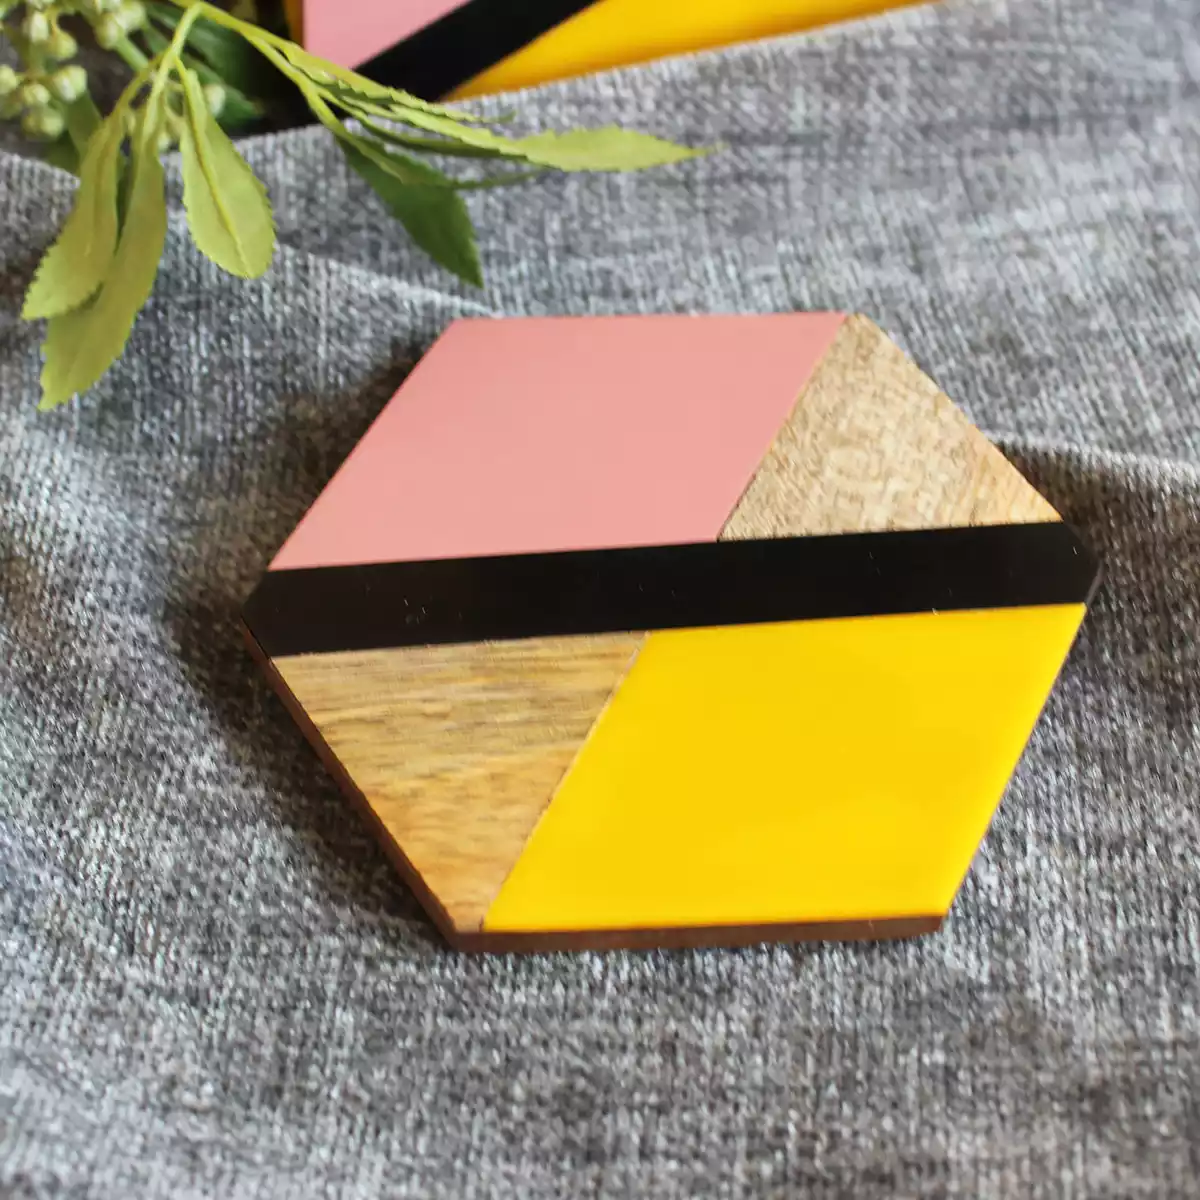 Hexagon Blush Pink with Vibrant Yellow set of 6 Coaster with Holder